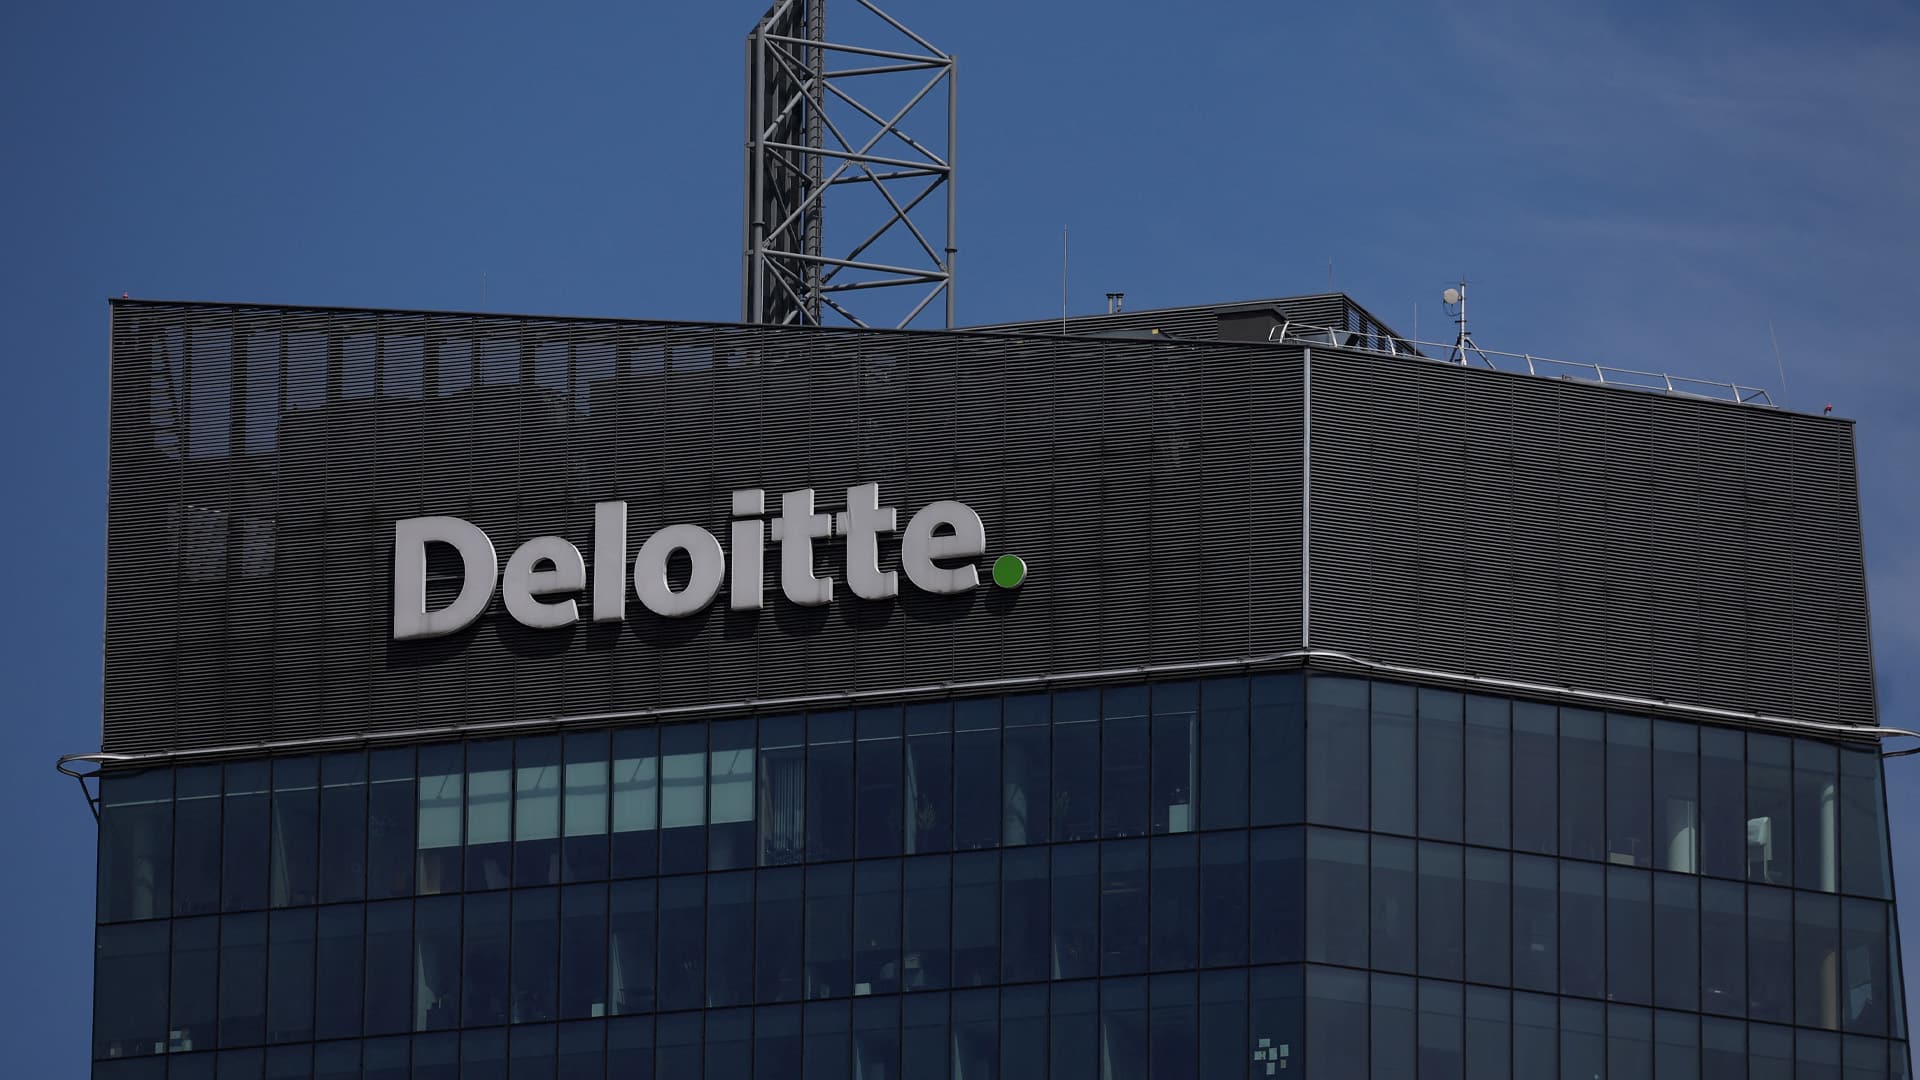 Deloitte resigns as BYJU'S auditor, edtech firm ropes in BDO for audit